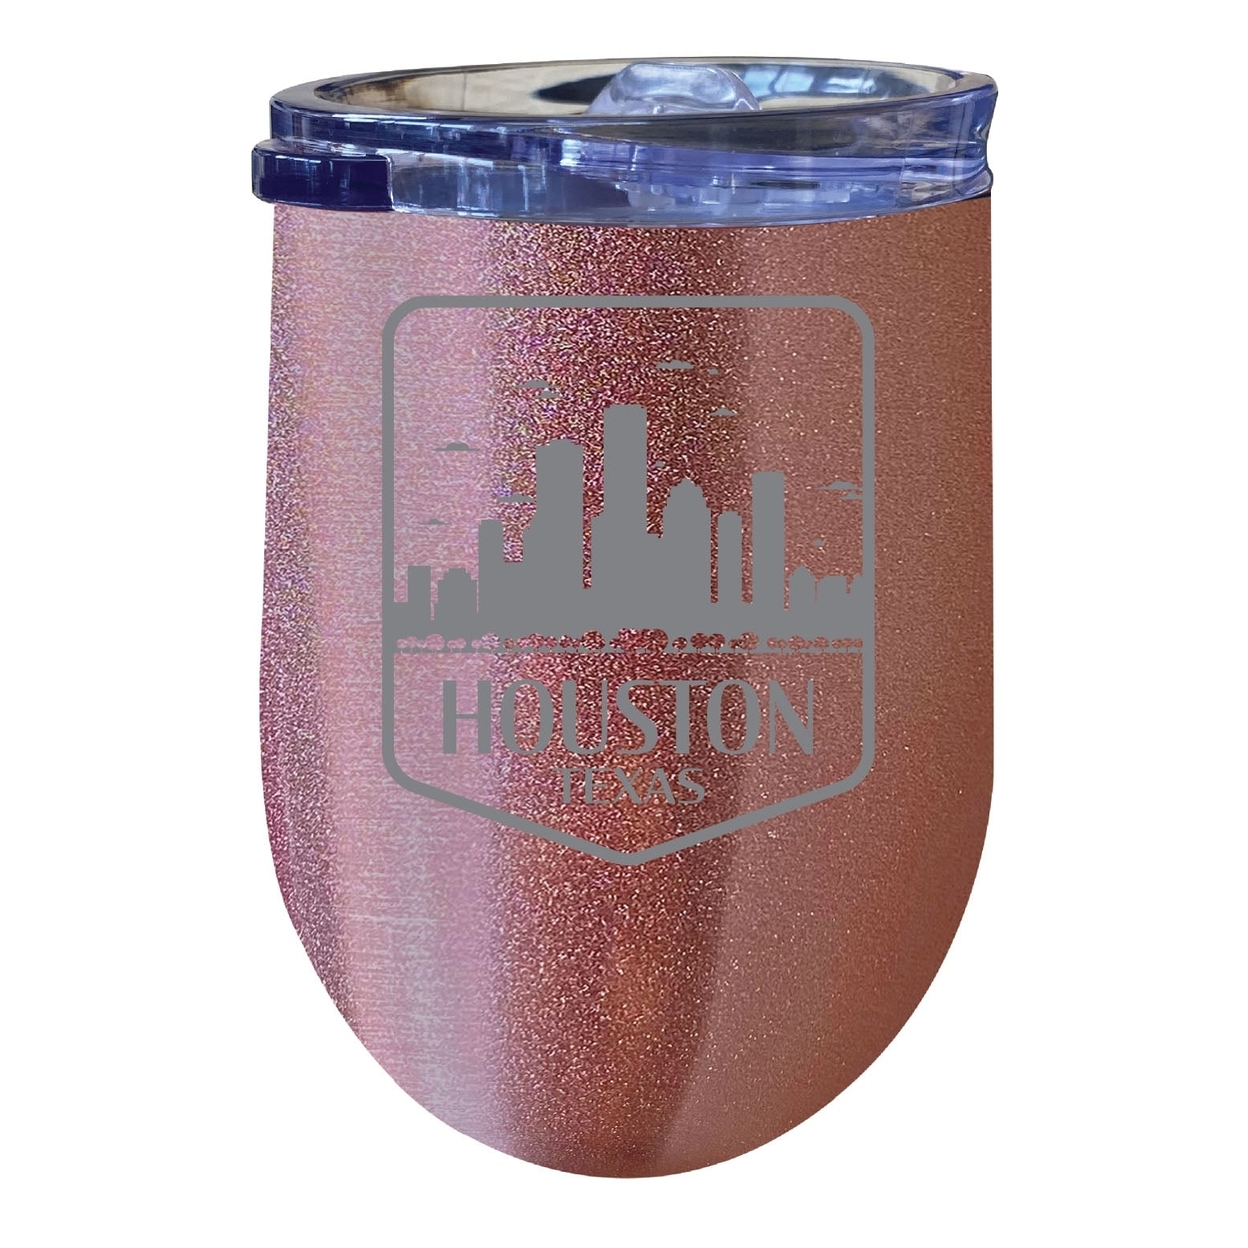 Houston Texas Souvenir 12 Oz Engraved Insulated Wine Stainless Steel Tumbler - Rose Gold,,2-Pack